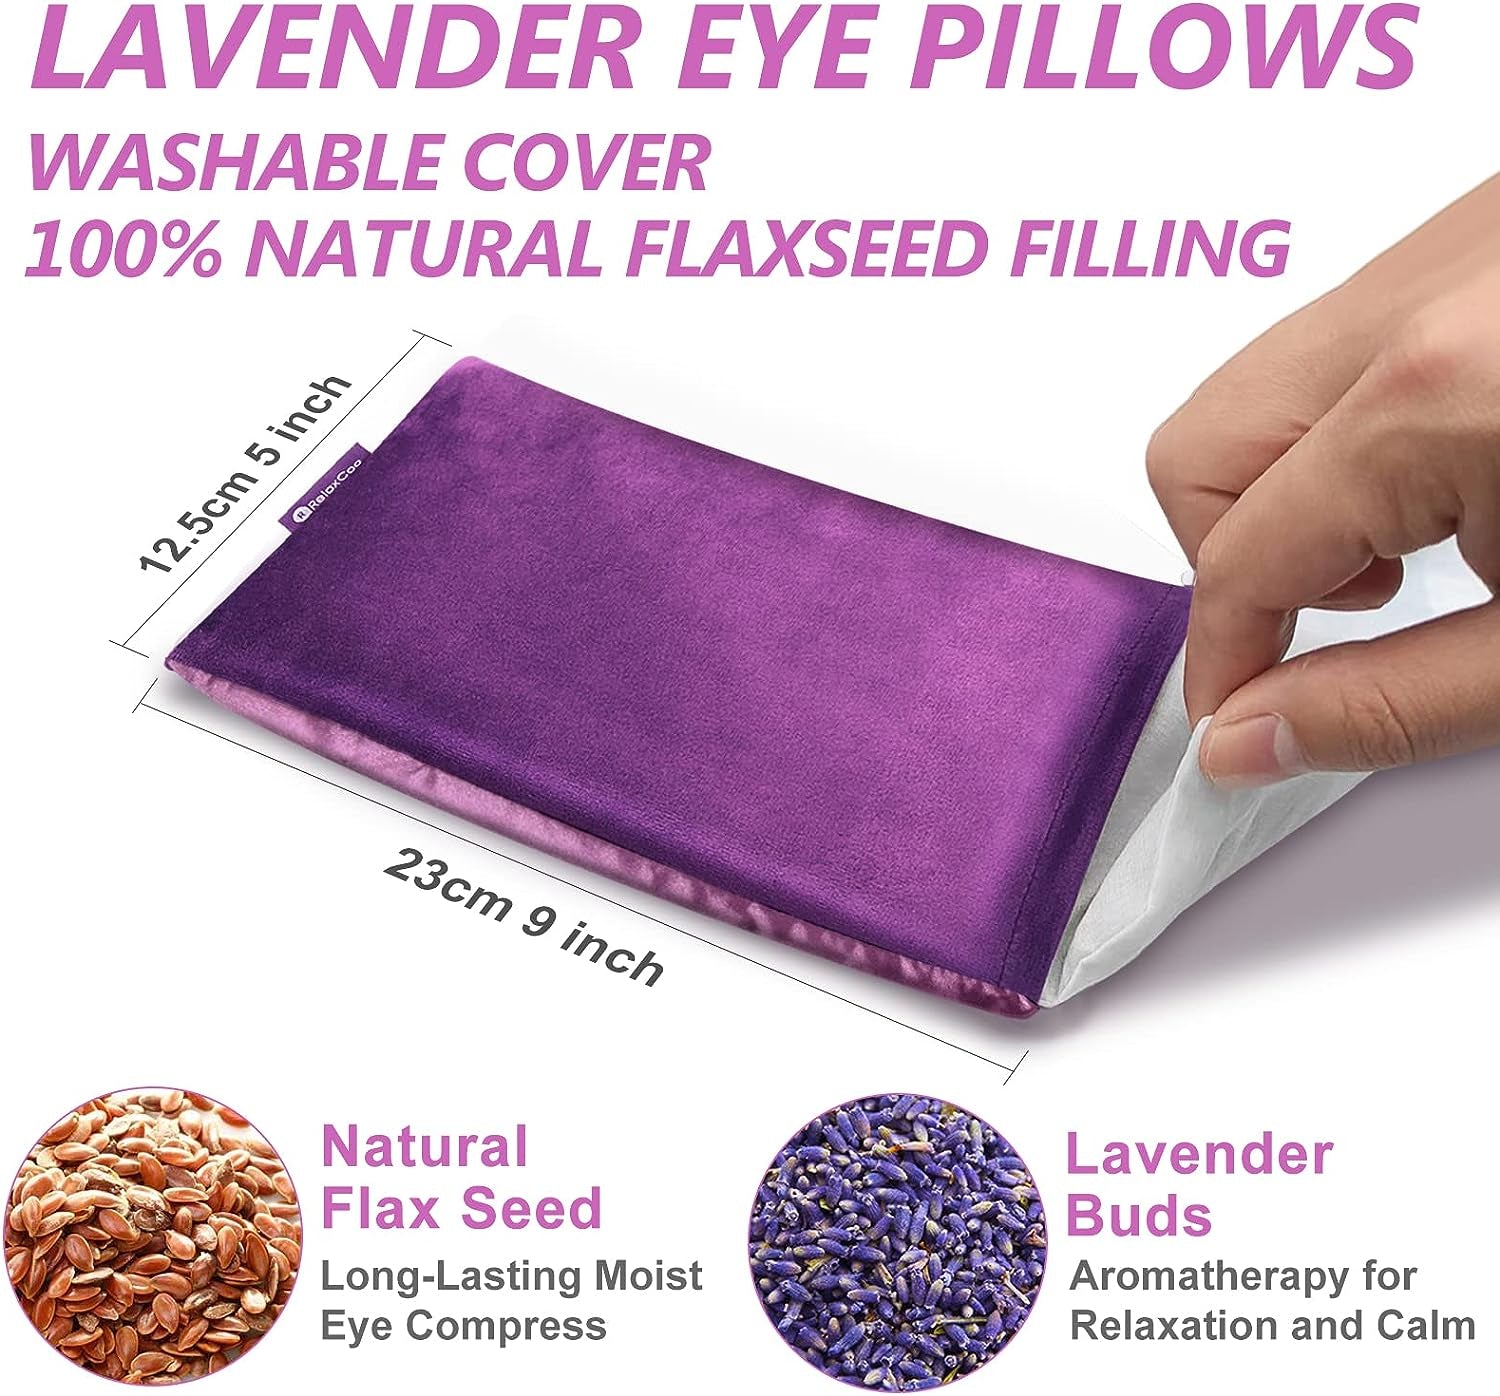 Lavender Eye Pillow for Relaxation, Yoga, Sleeping, Weighted Eye Mask Heated for Headache, Sinus, Dry Eyes Relief, Moist Heat Eye Compress, Meditation Accessories with Aromatherapy, Pack of 2